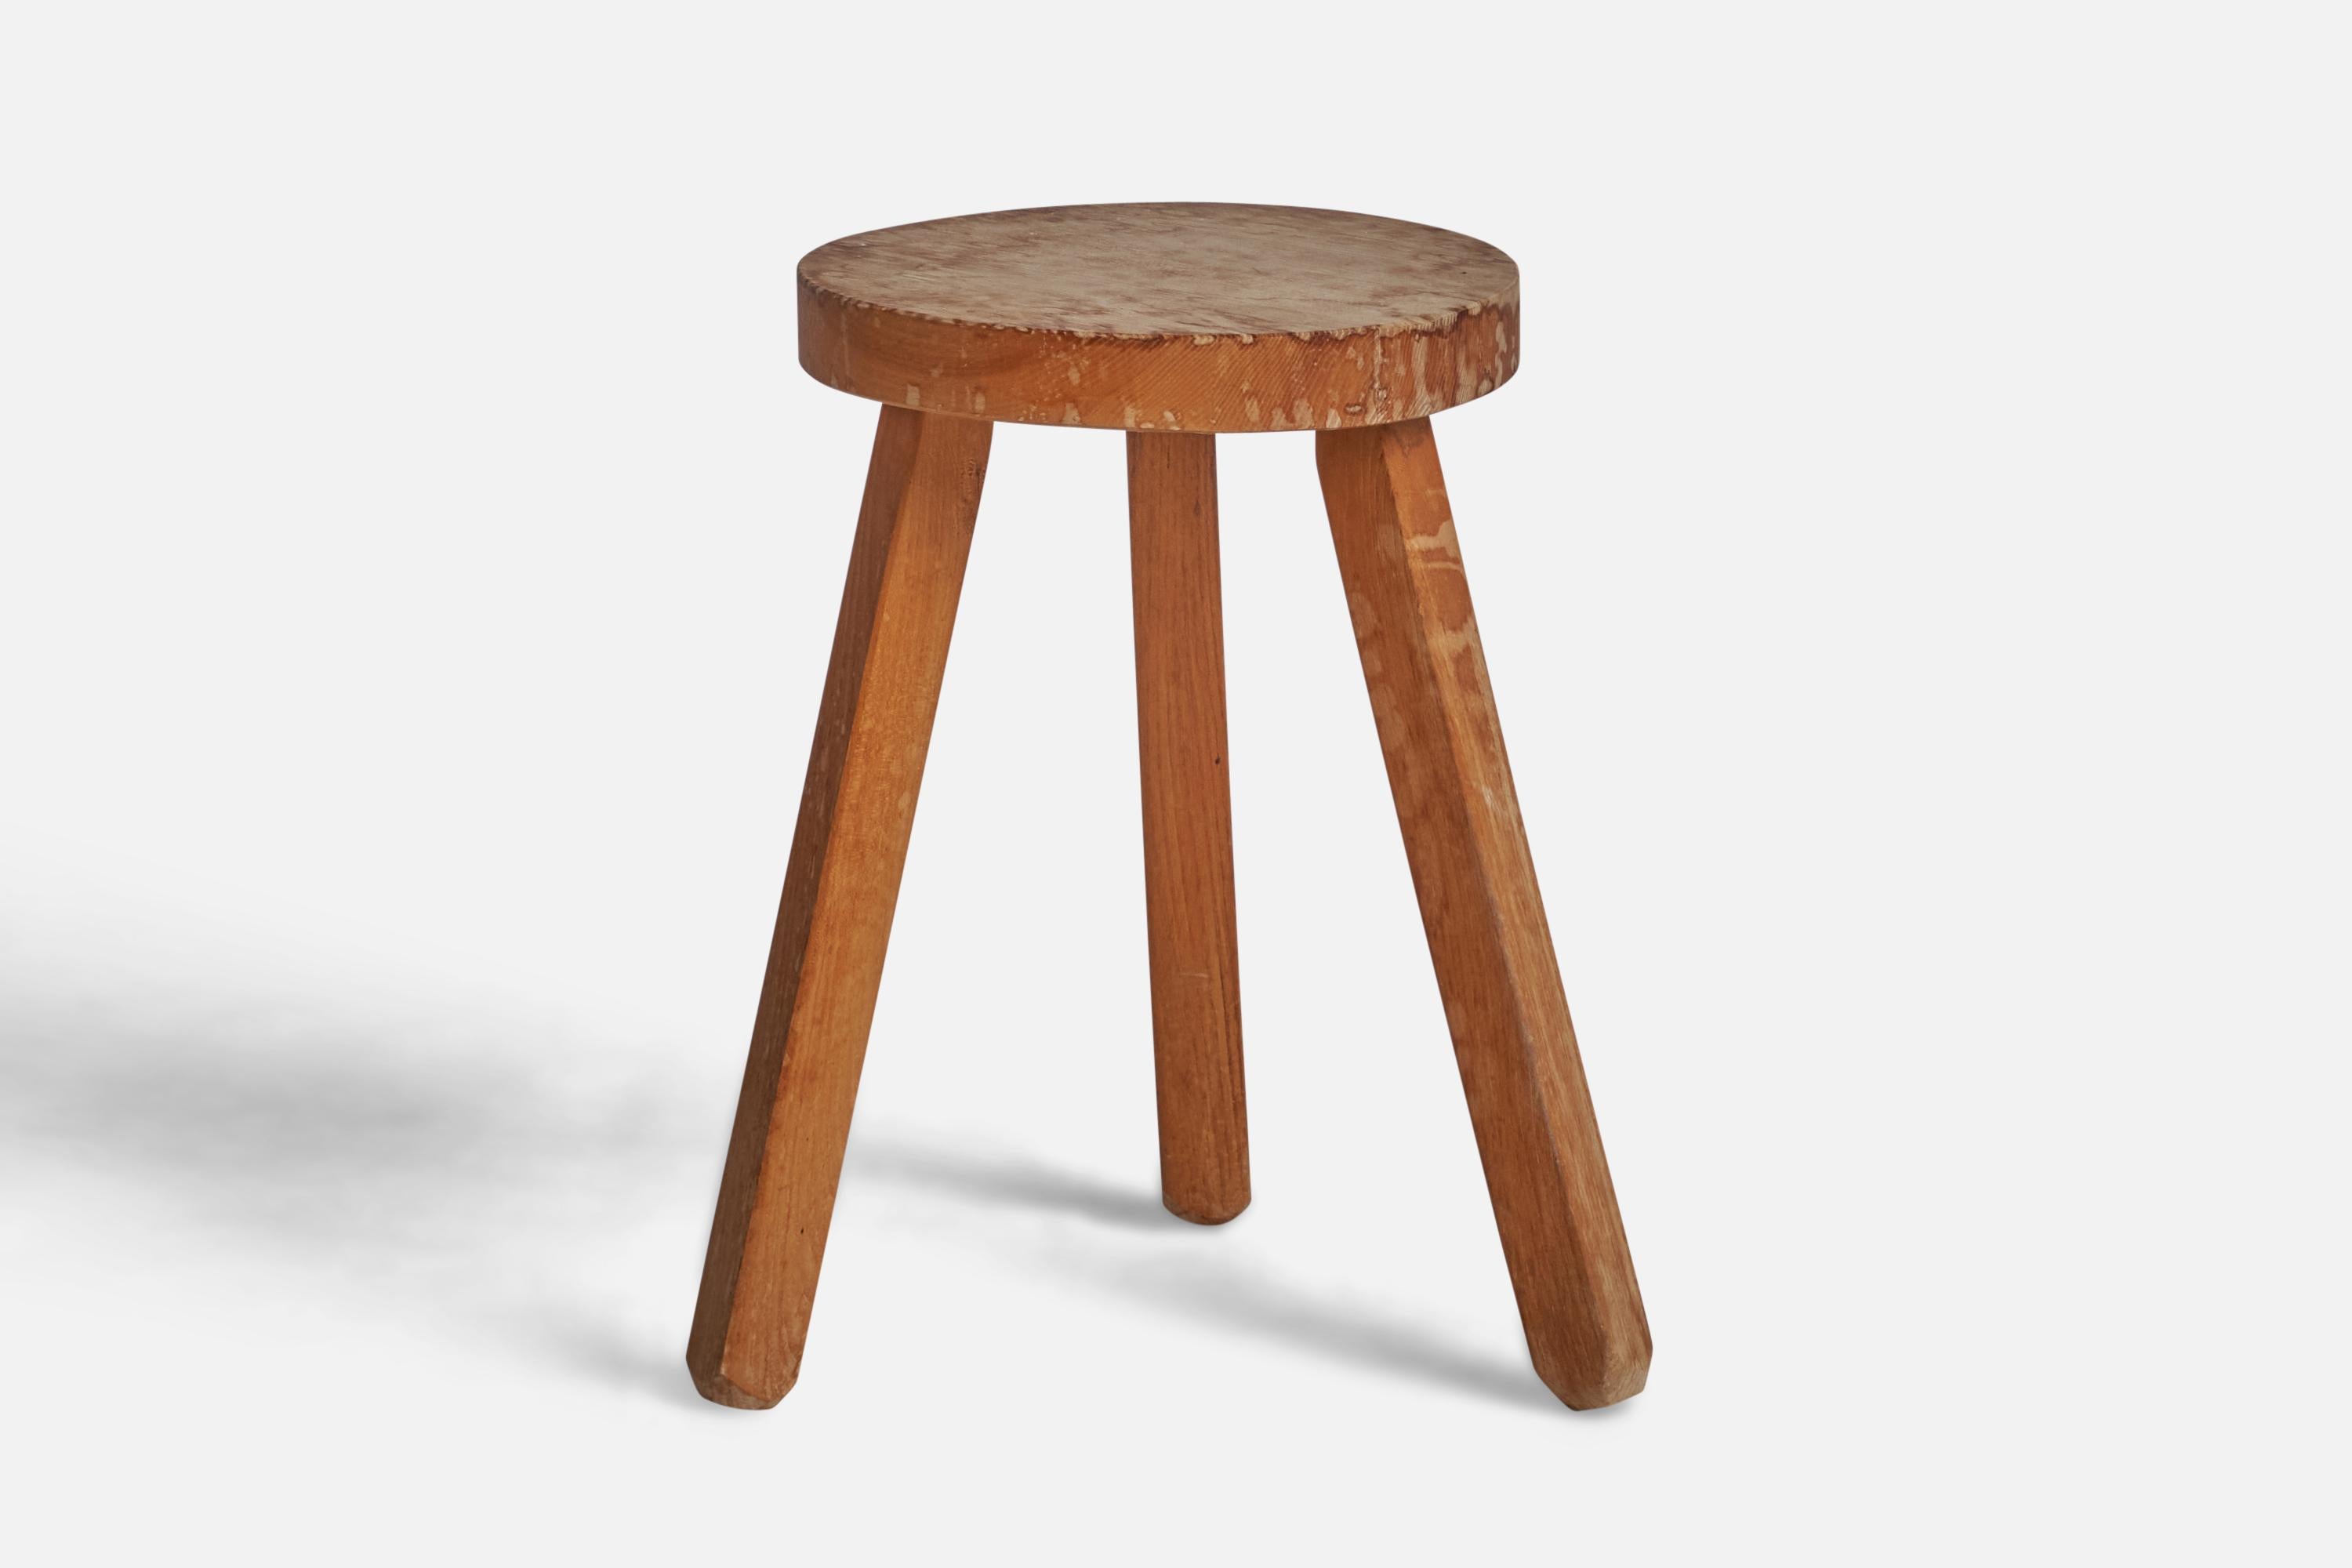 A wood stool designed and produced in Sweden, 1940s